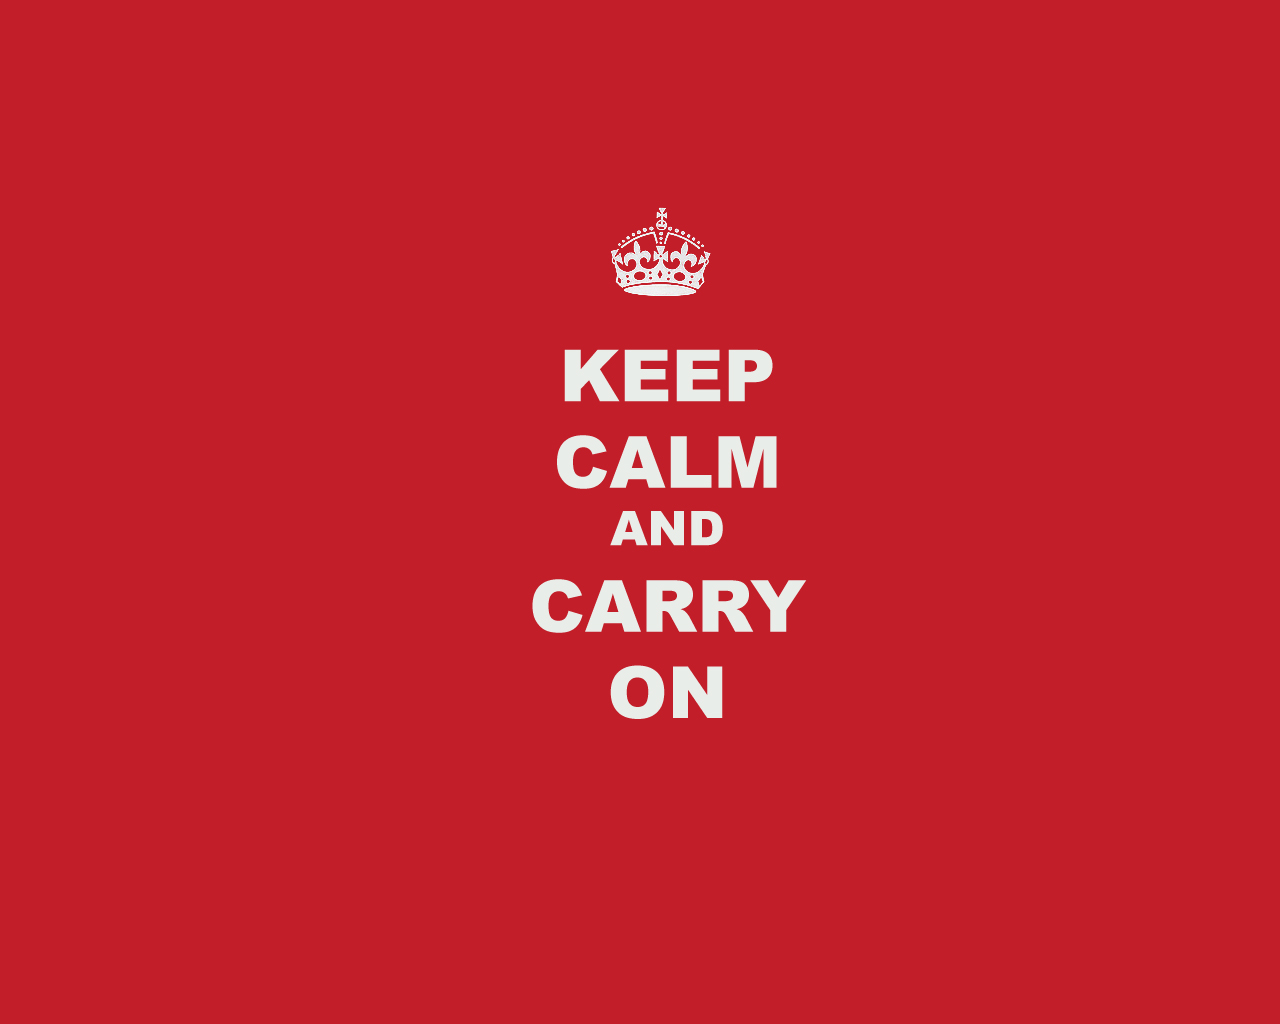 Keep Calm and Carry On wallpapers Keep Calm and Carry On stock